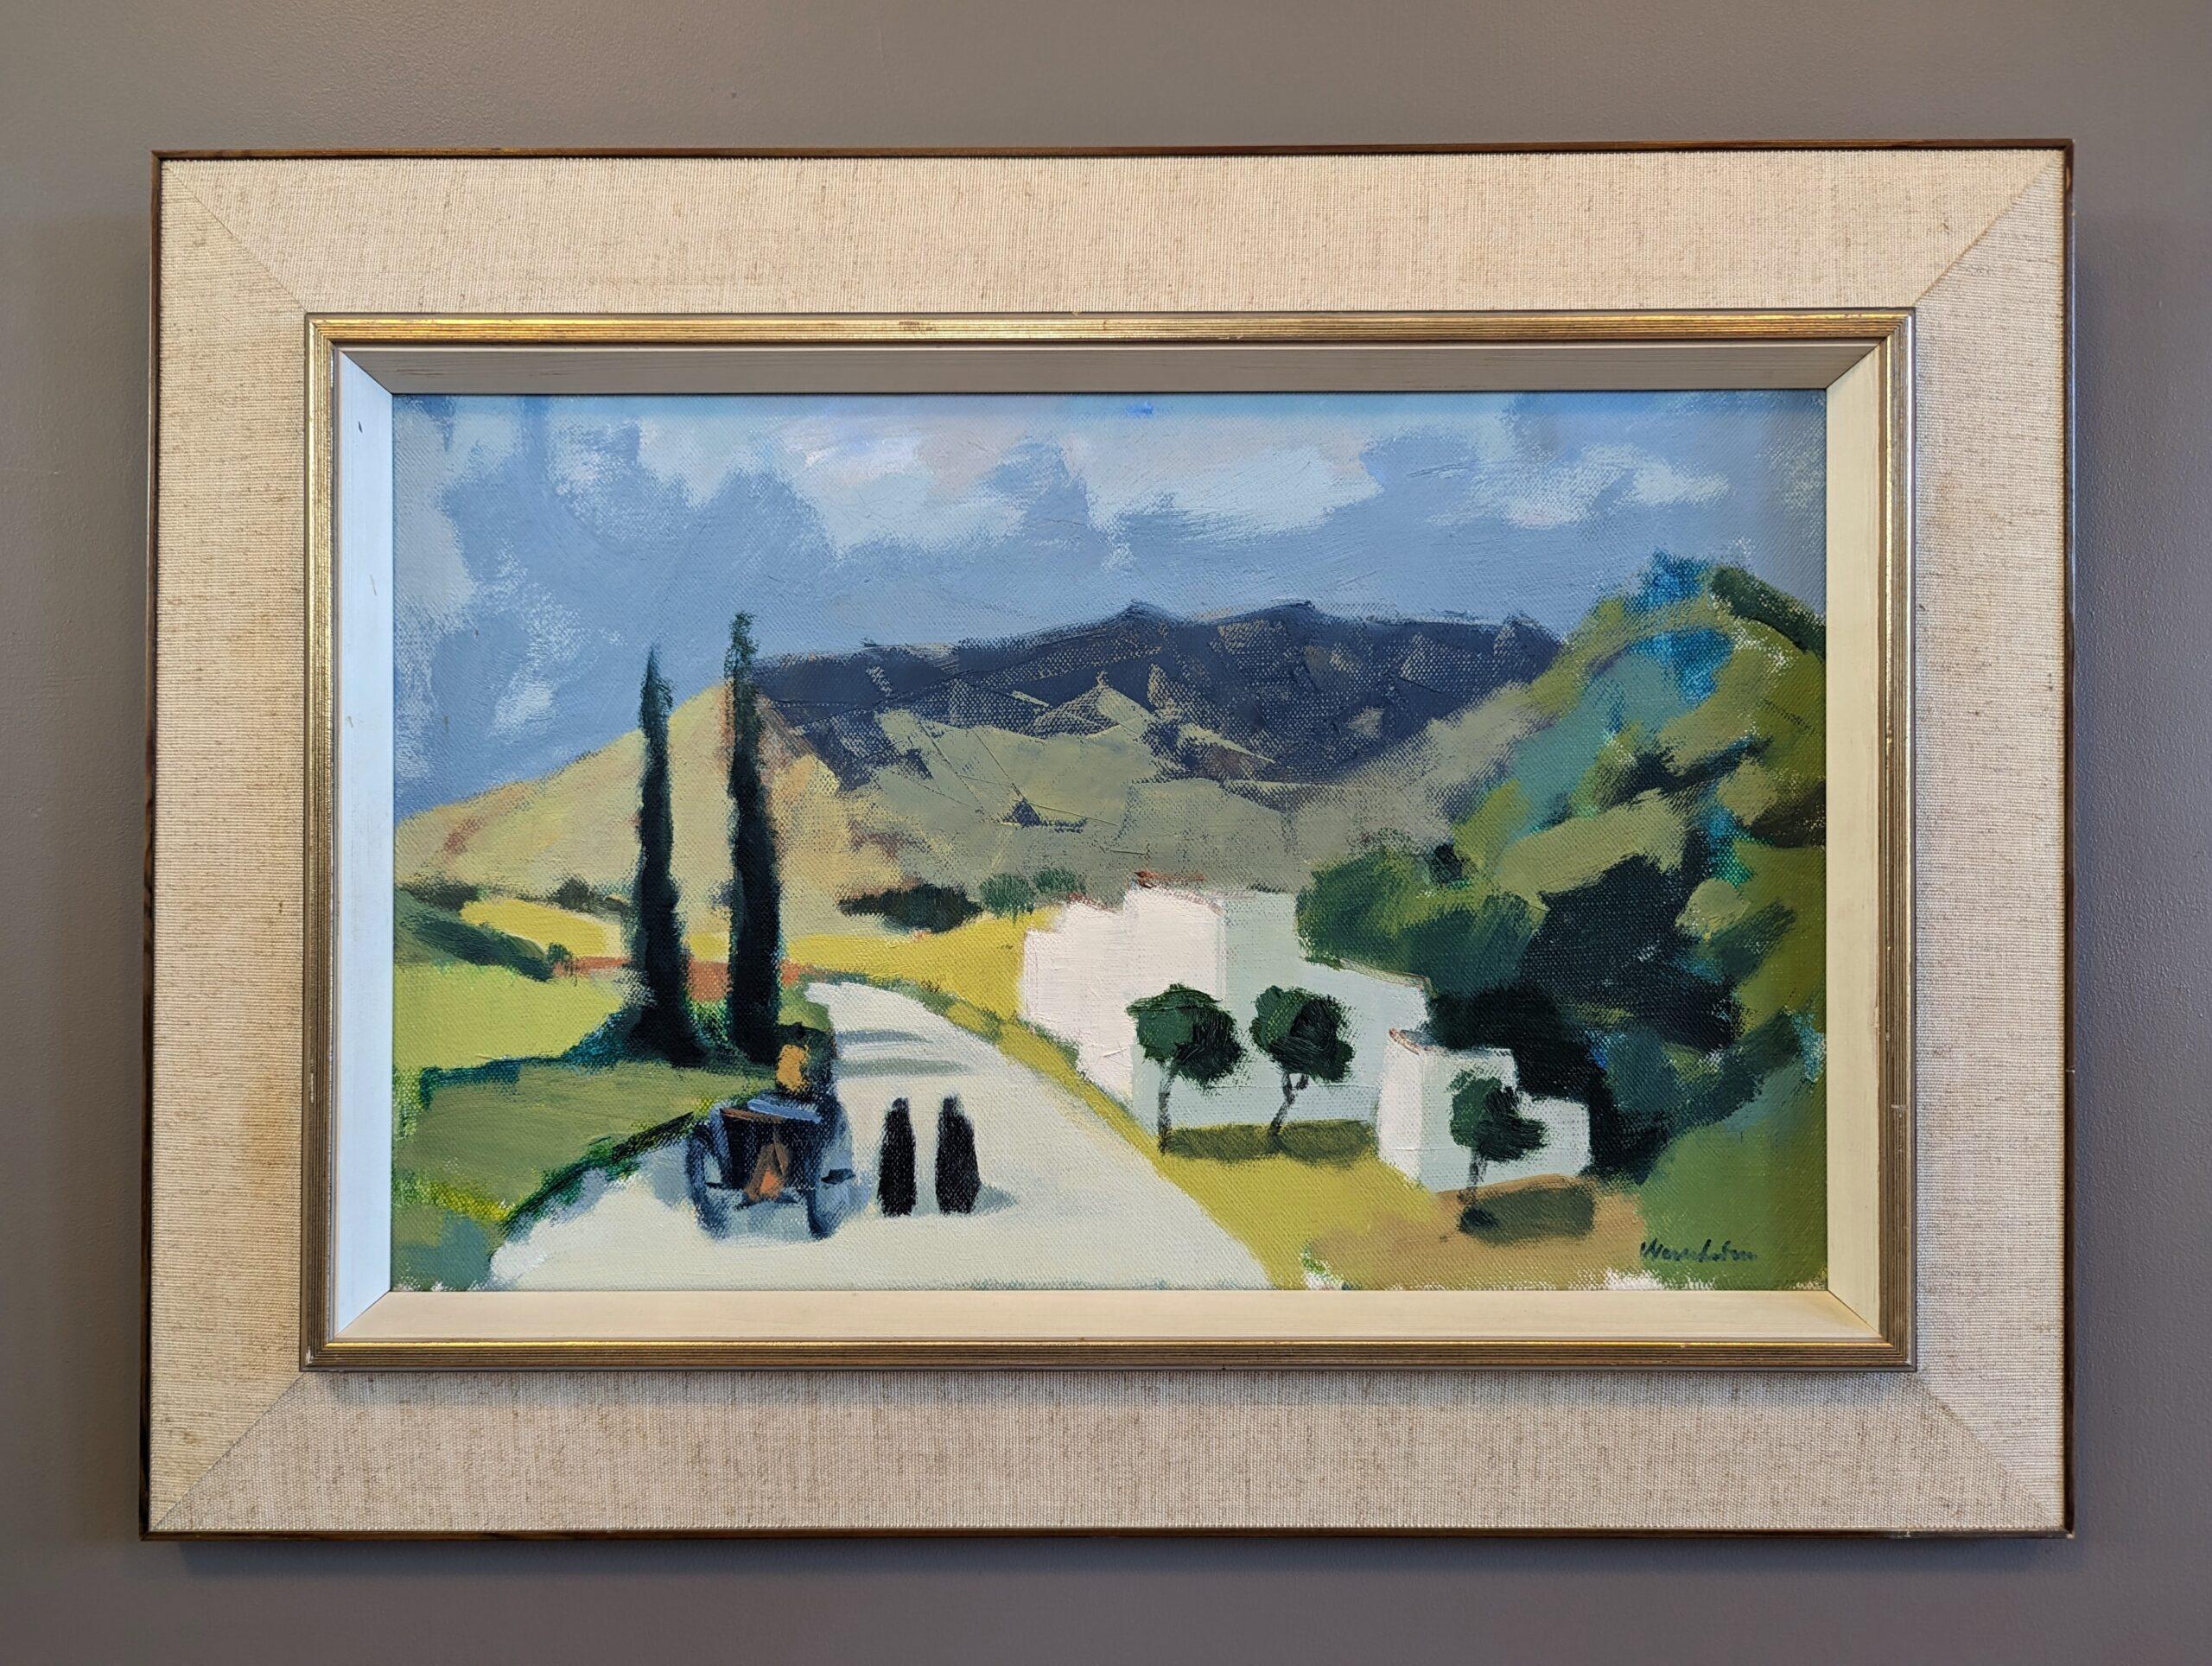 VALLEY PATHWAY
Size: 38.5 x 53 cm (including frame)
Oil on Canvas

A charming and very pleasant modernist oil landscape, painted by the established Swedish artist Stig Wernheden (1921-1997), whose works have been represented at public collections in